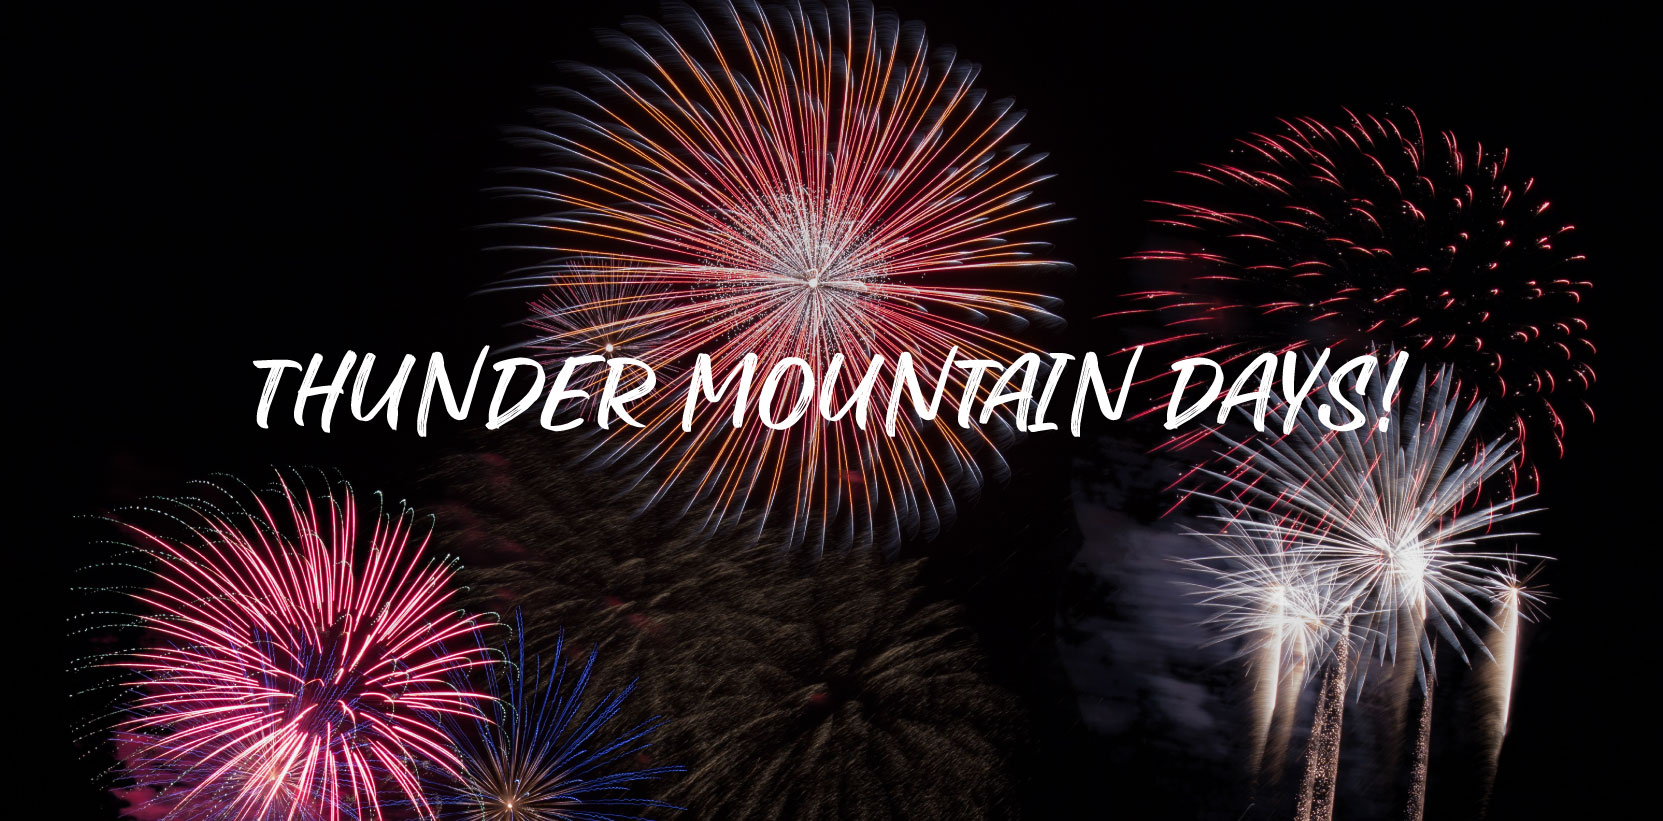 Past Event: Thunder Mountain Days – July 4th, 2019